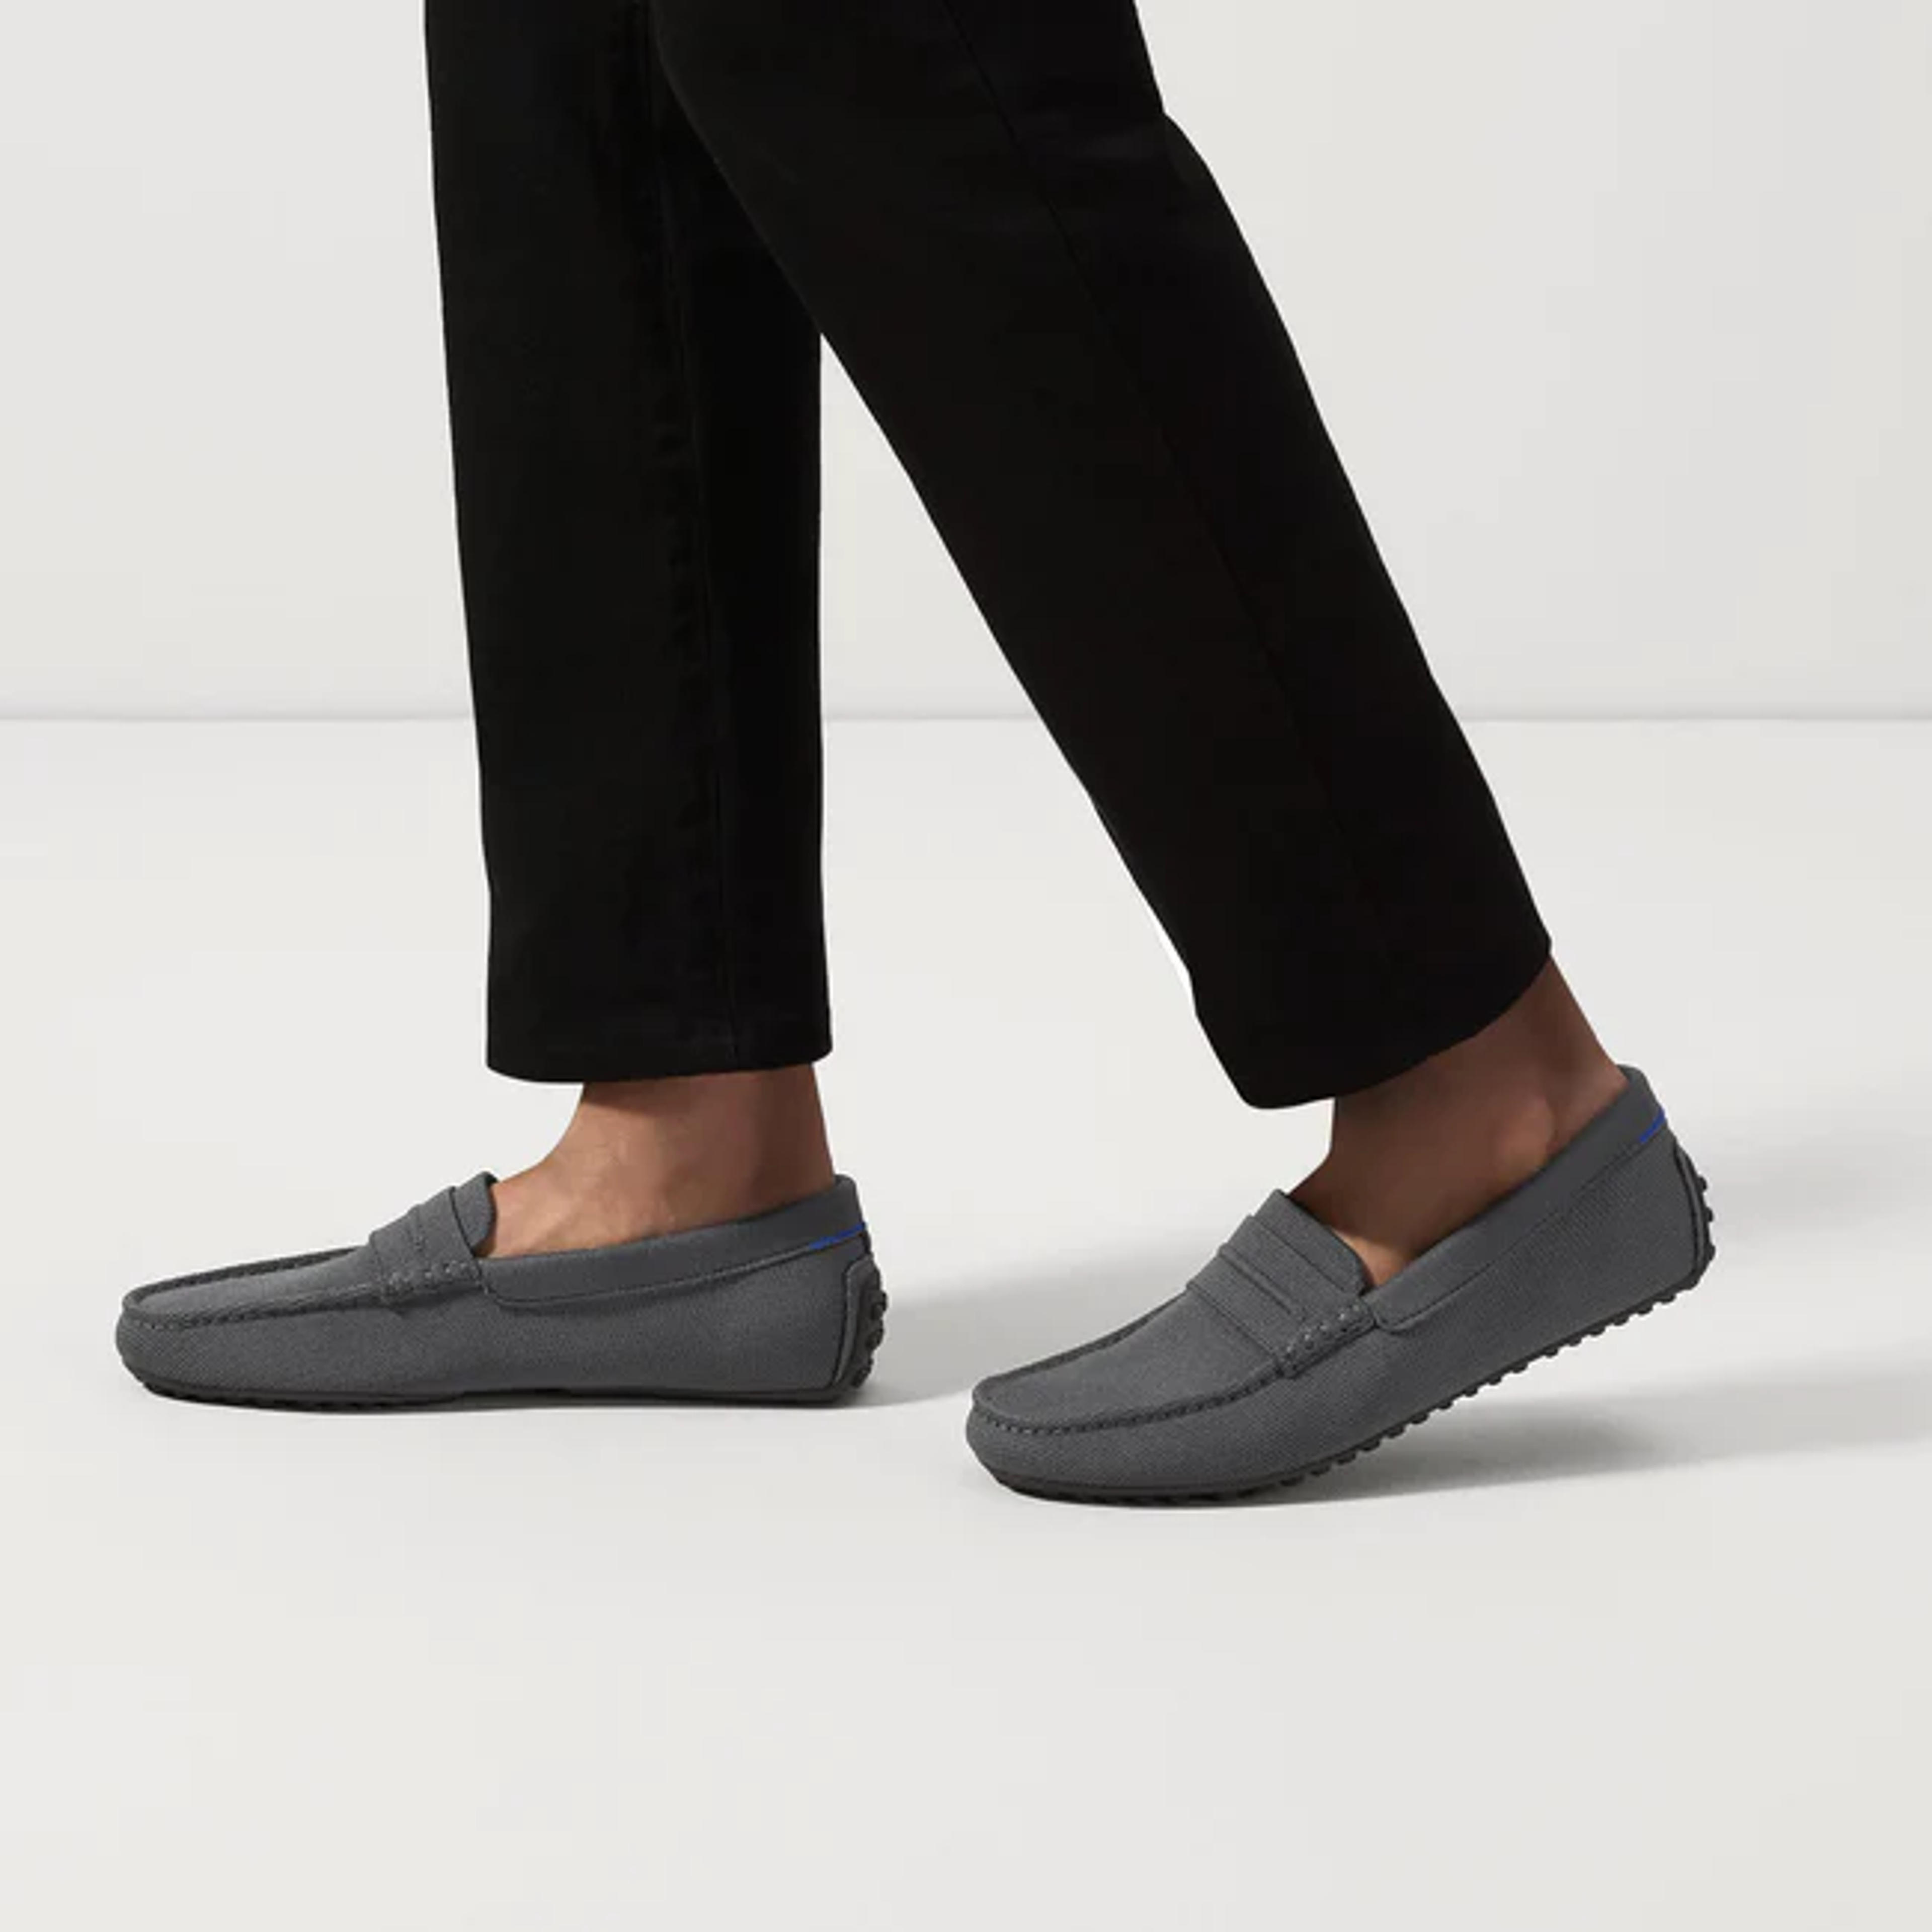 The Driving Loafer in Graphite Grey | Men’s Slip-on Loafers | Rothy's